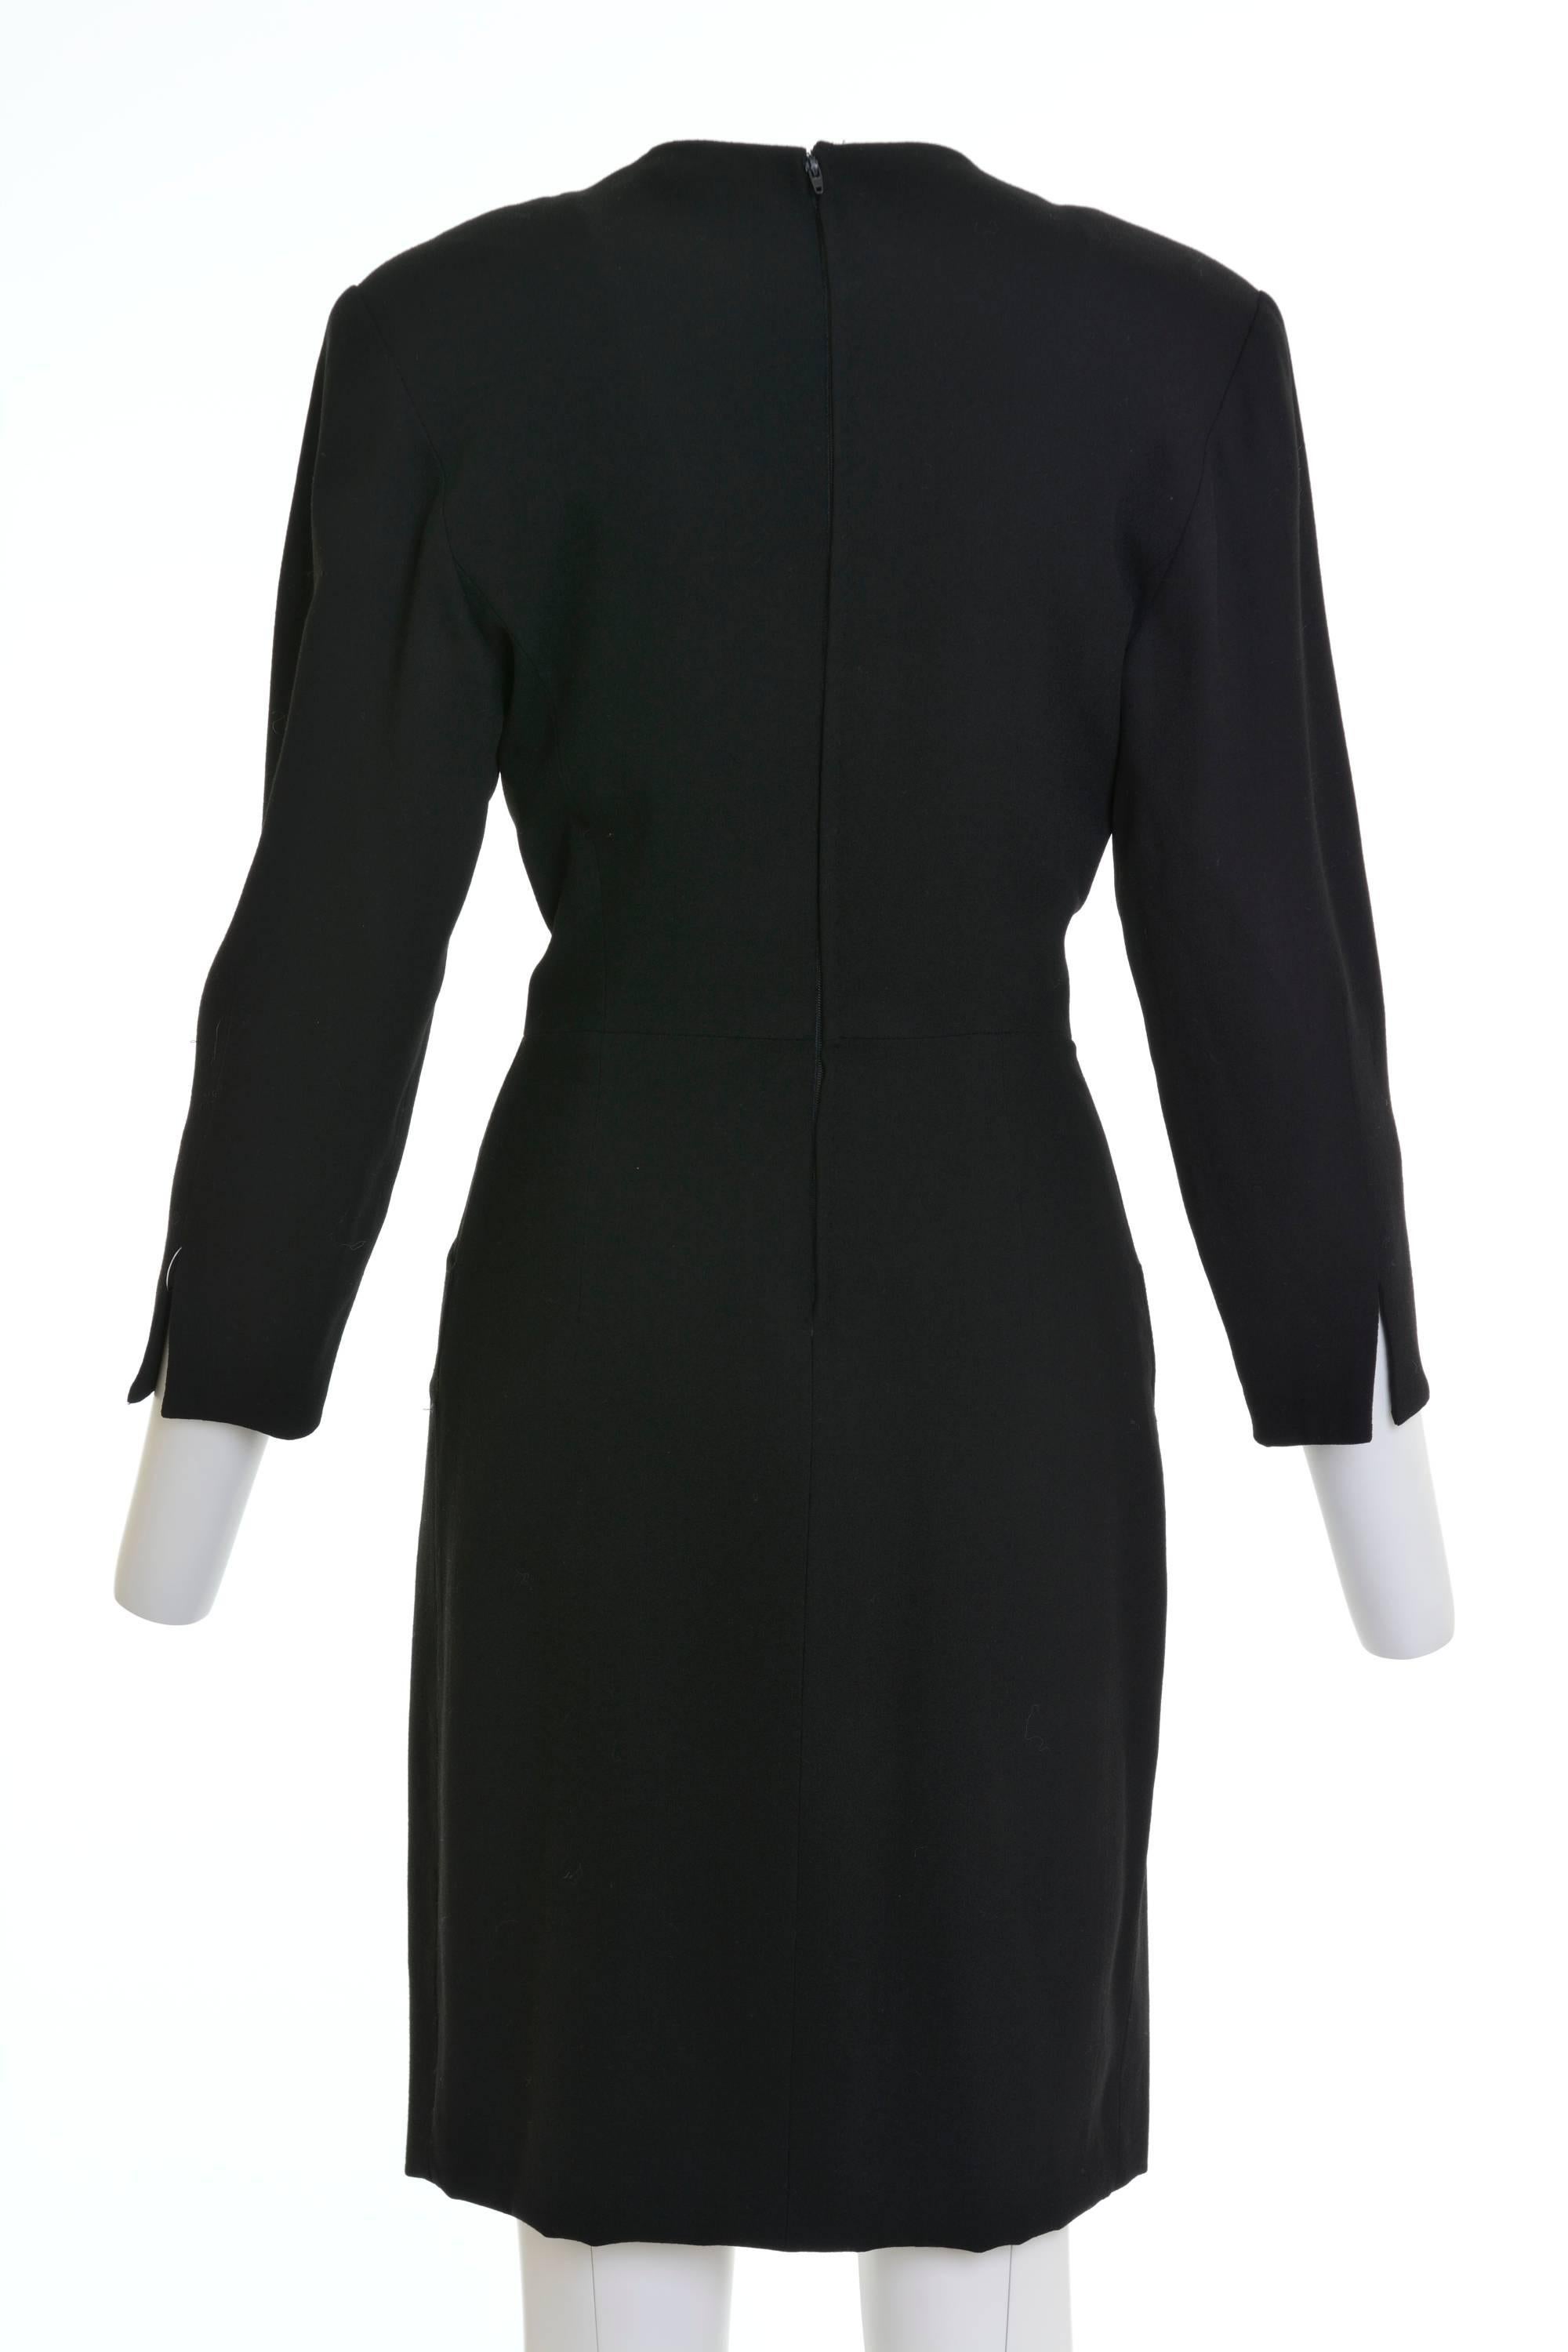 This lovely Gianfranco Ferrè day dress is in a black woolen fabric with decorative jewelry buttons. It has long sleeves, slightly padded shoulder, two side pockets, back zip and hook closure and is fully satin lined.

Good vintage